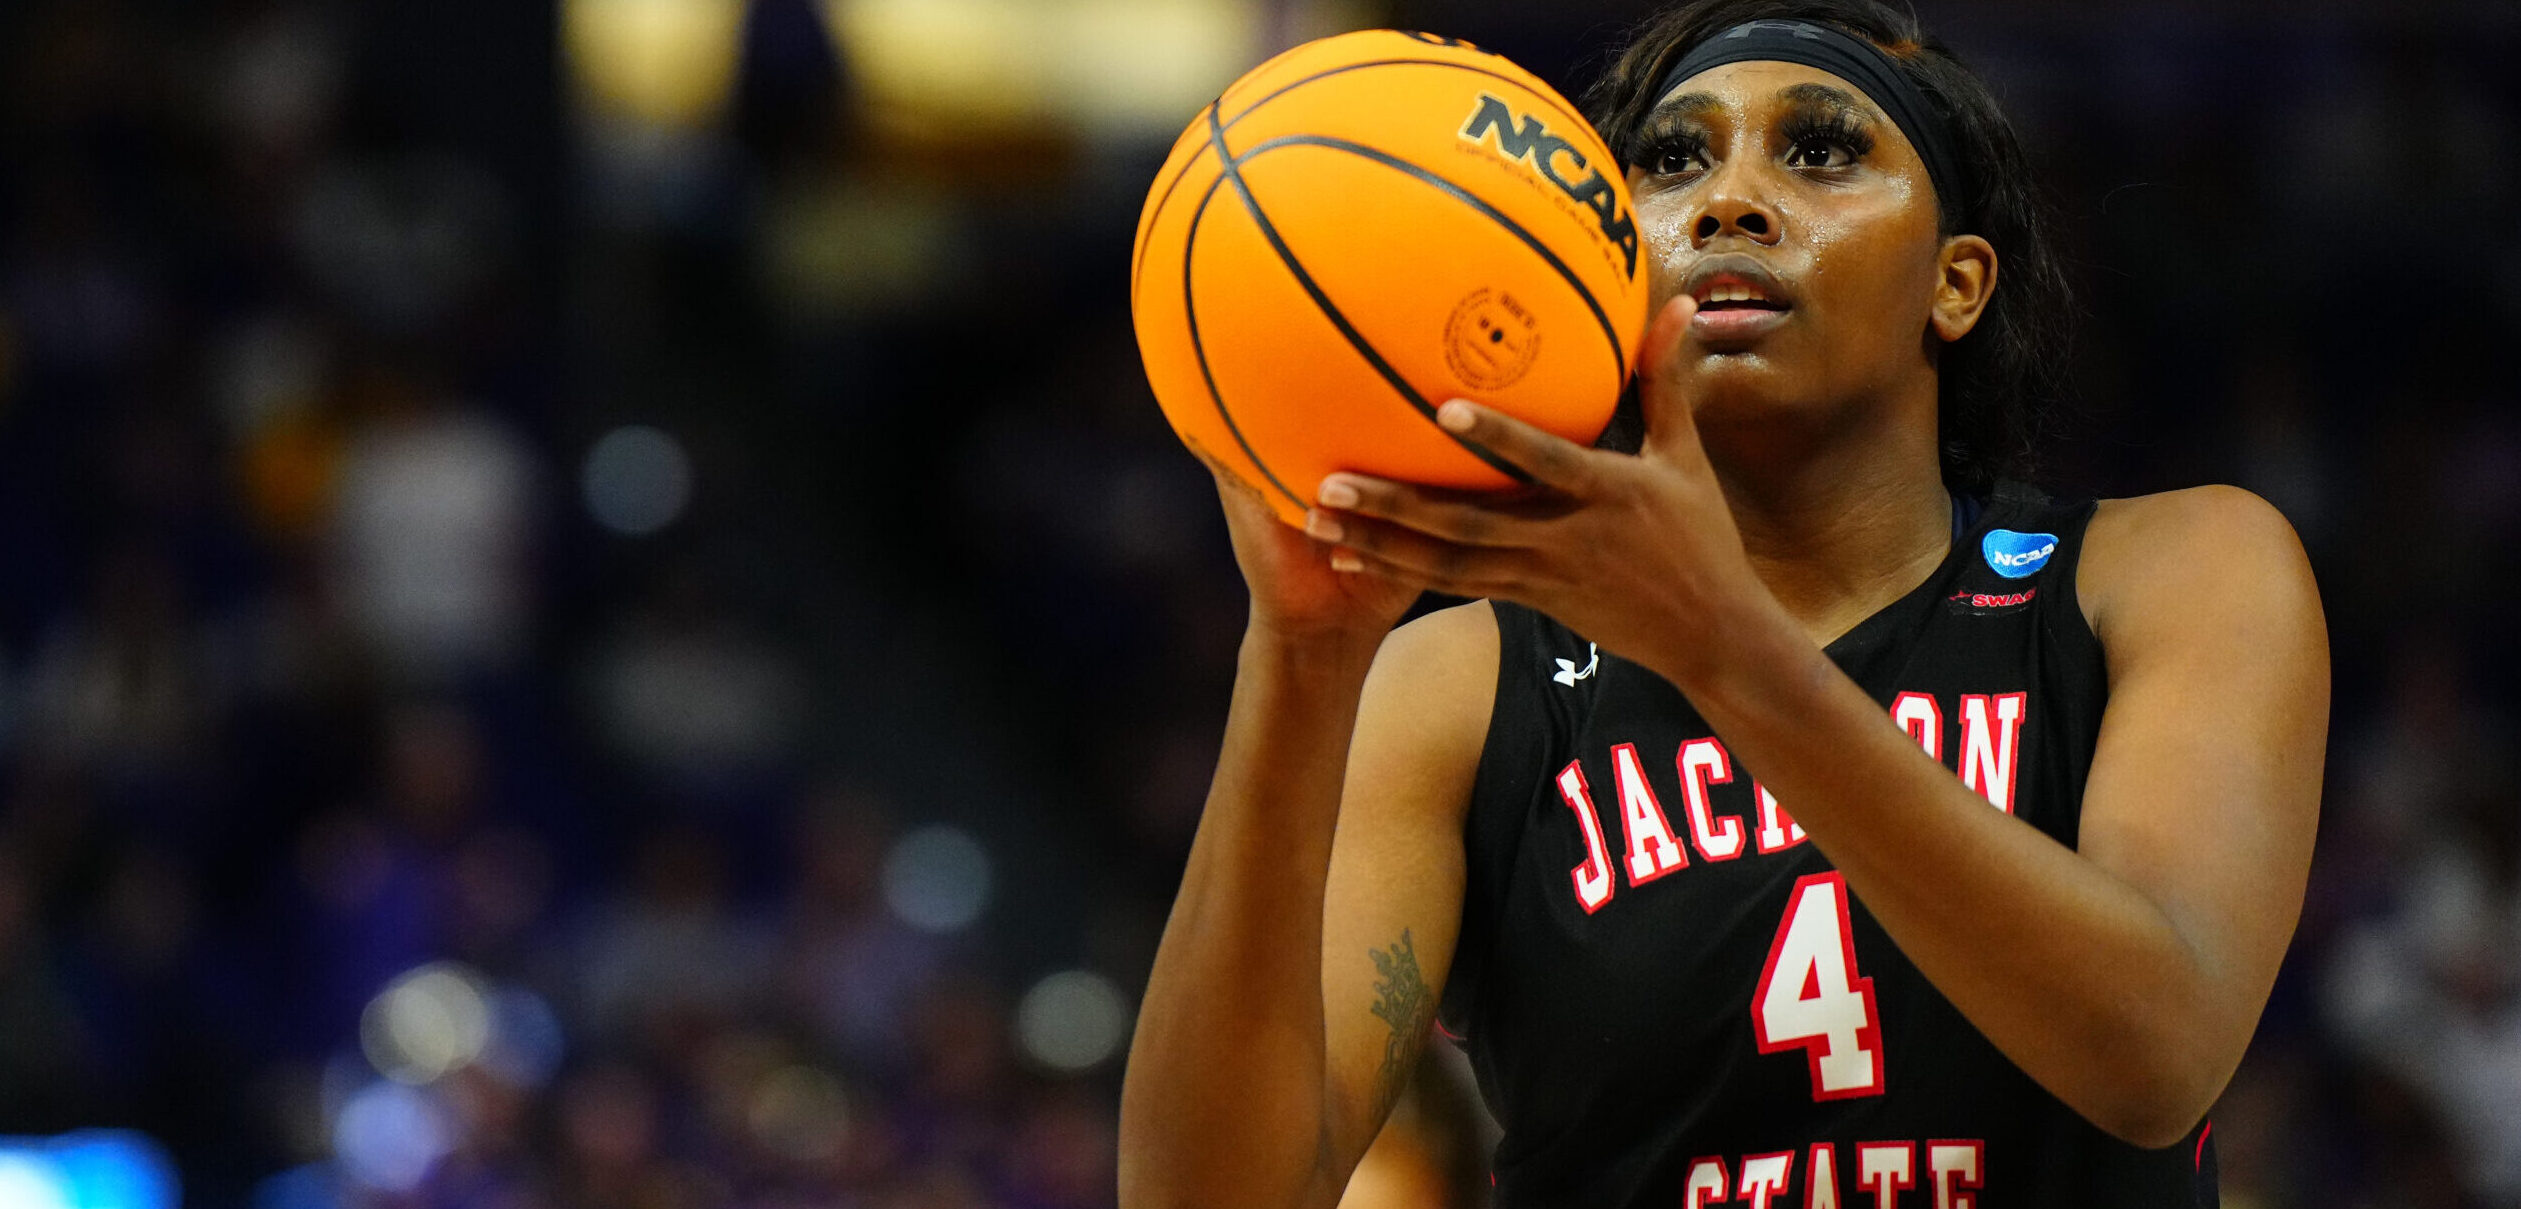 Ameshya Williams-Holliday Becomes First HBCU Player Drafted By WNBA In 20 Years